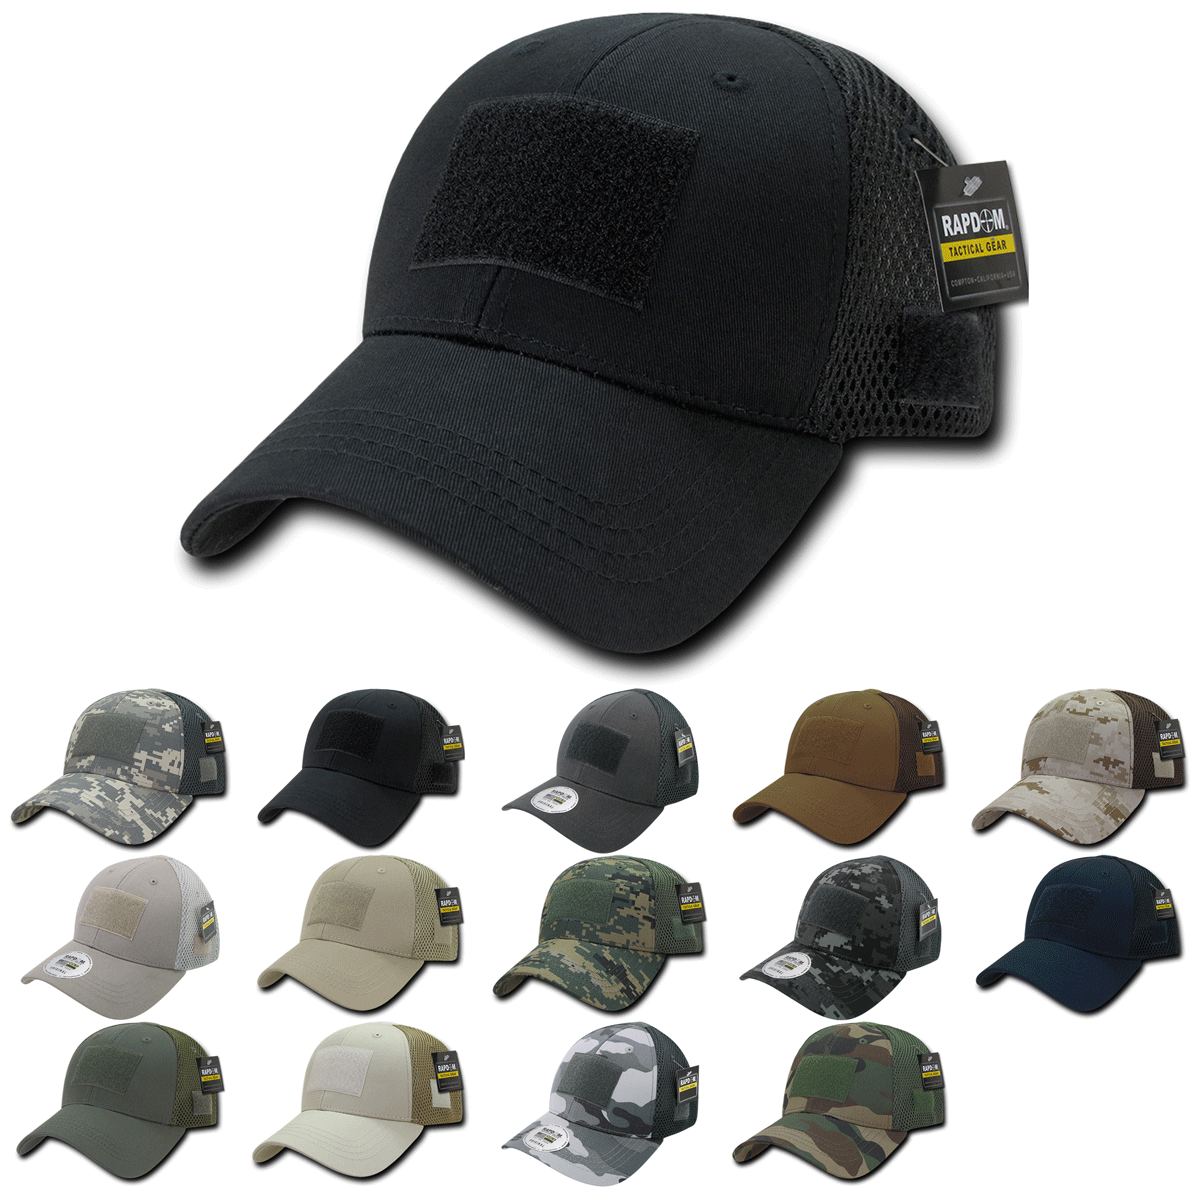 Blank Patches - Hat Velcro Patches {20% OFF}